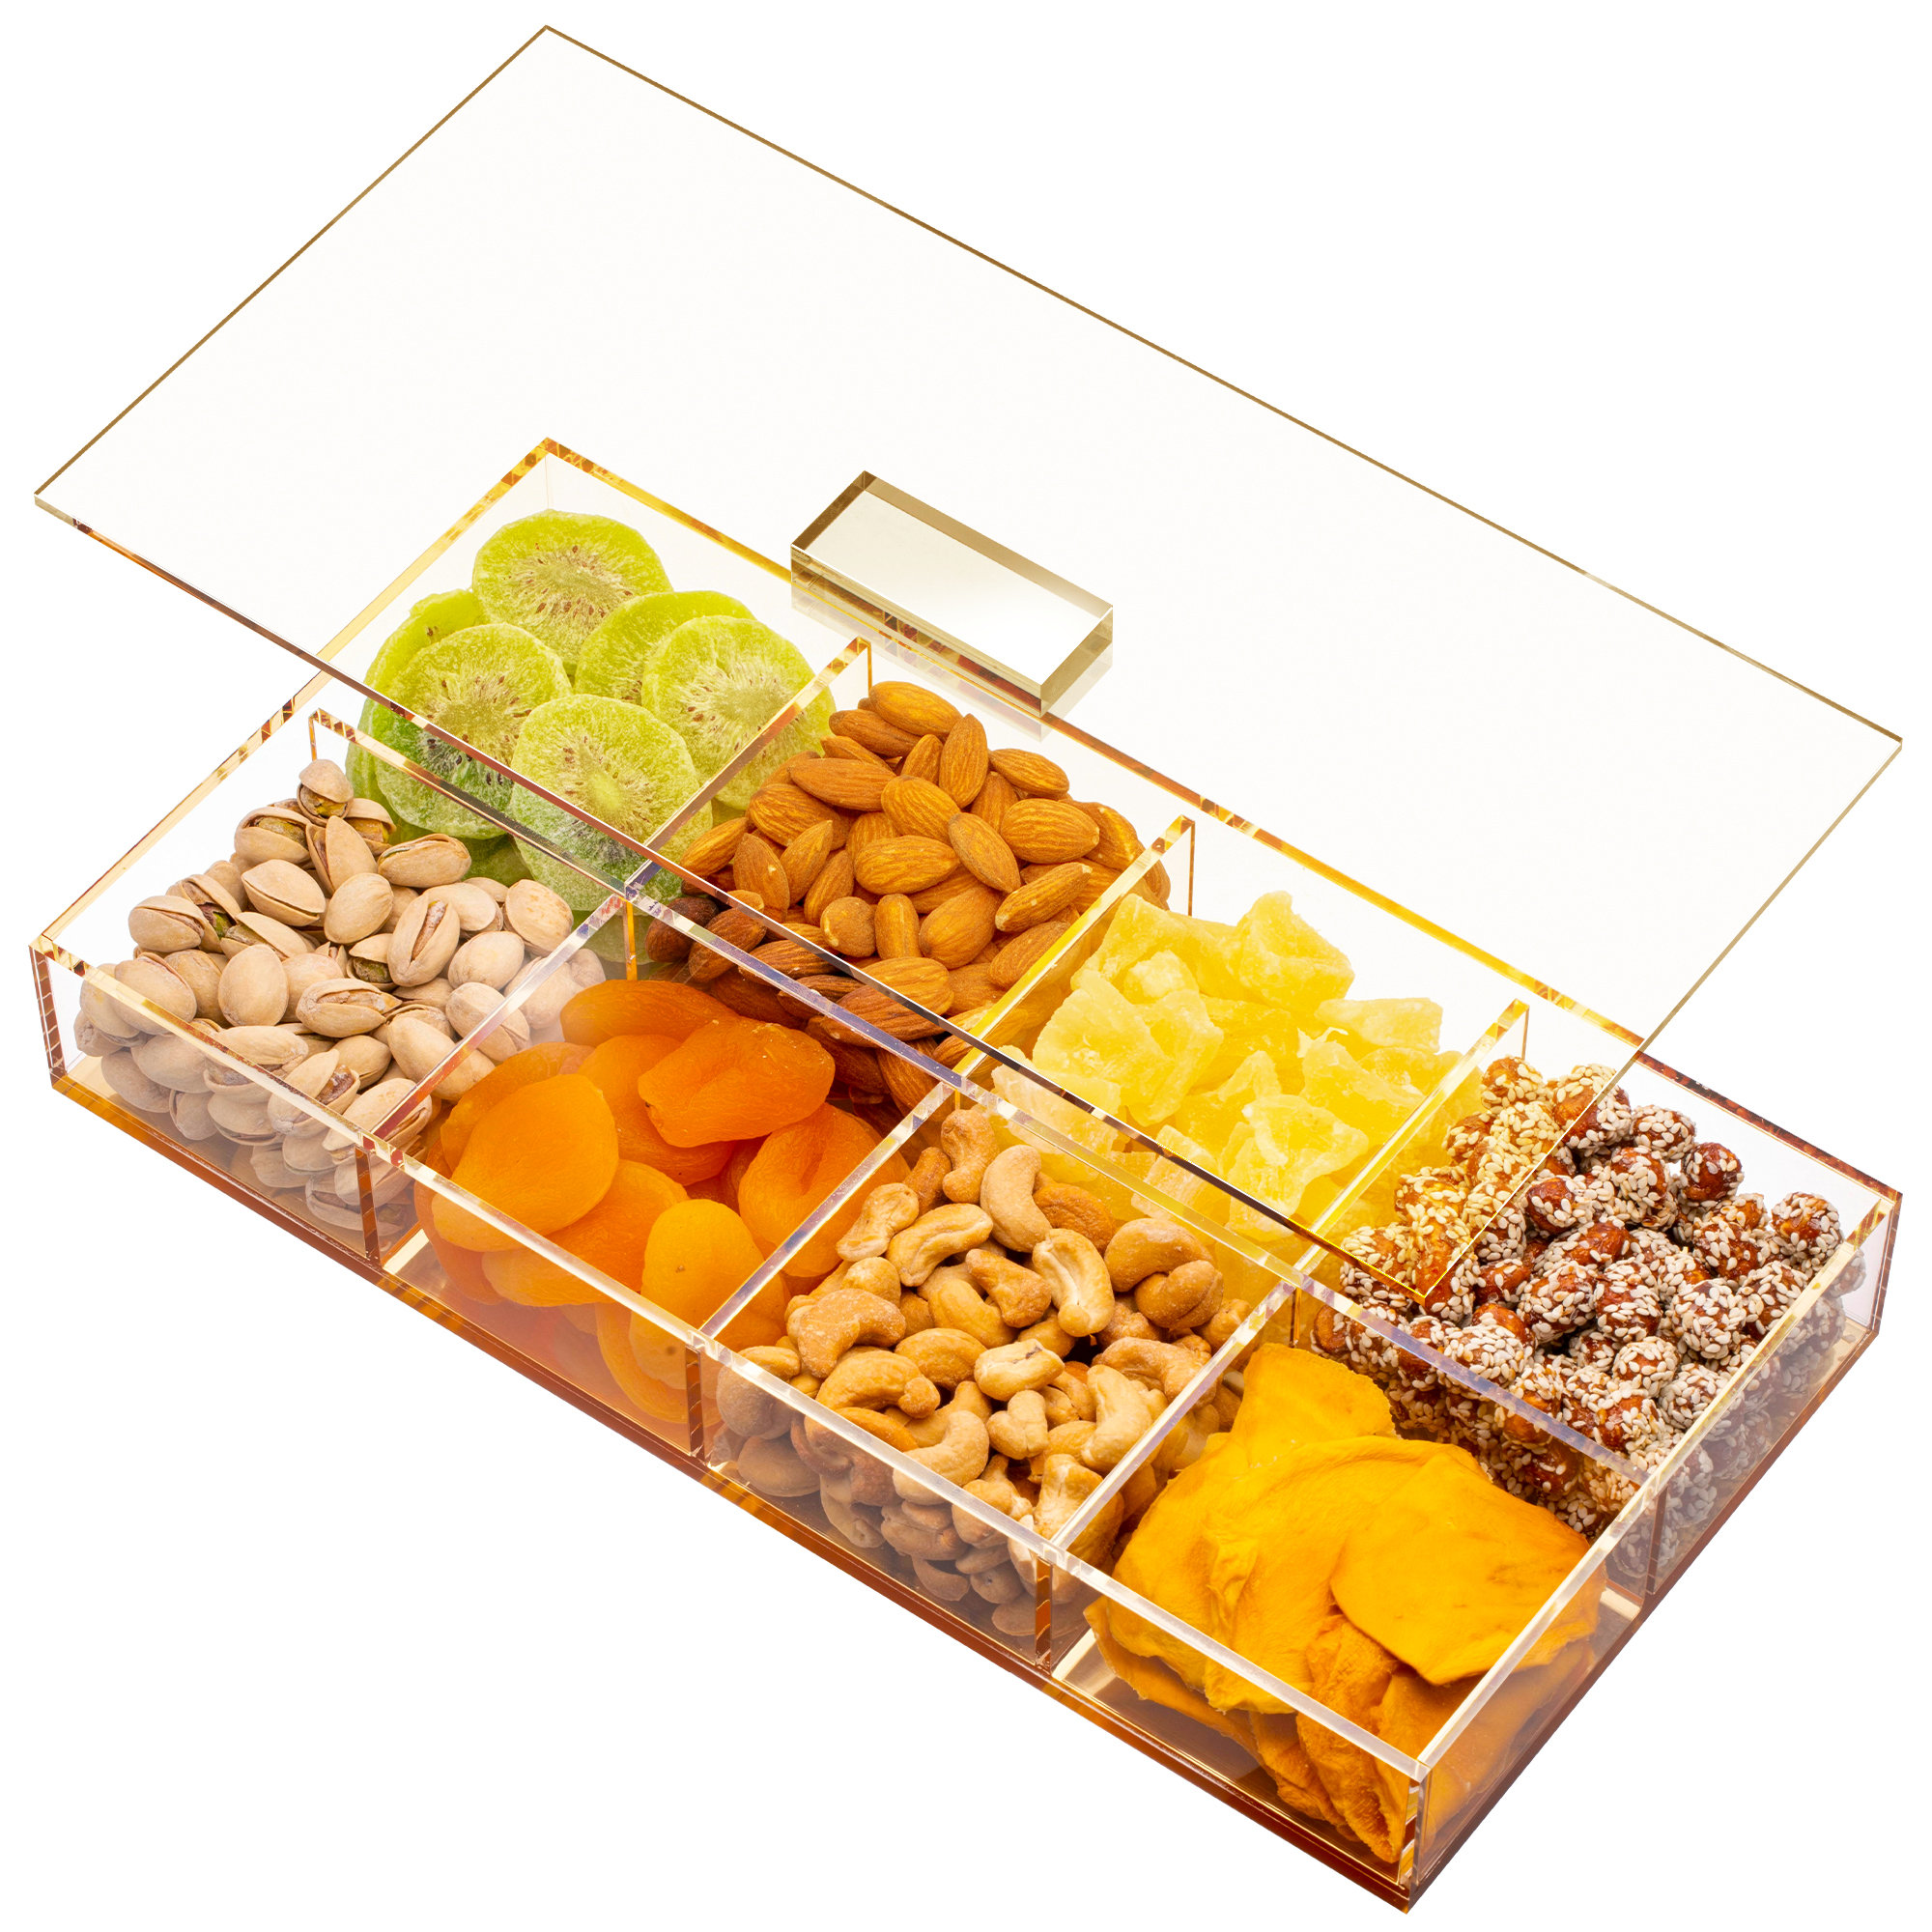 Veggie Tray with Lid Food Storage Containers Square Fruit Divided Snack  Tray Con